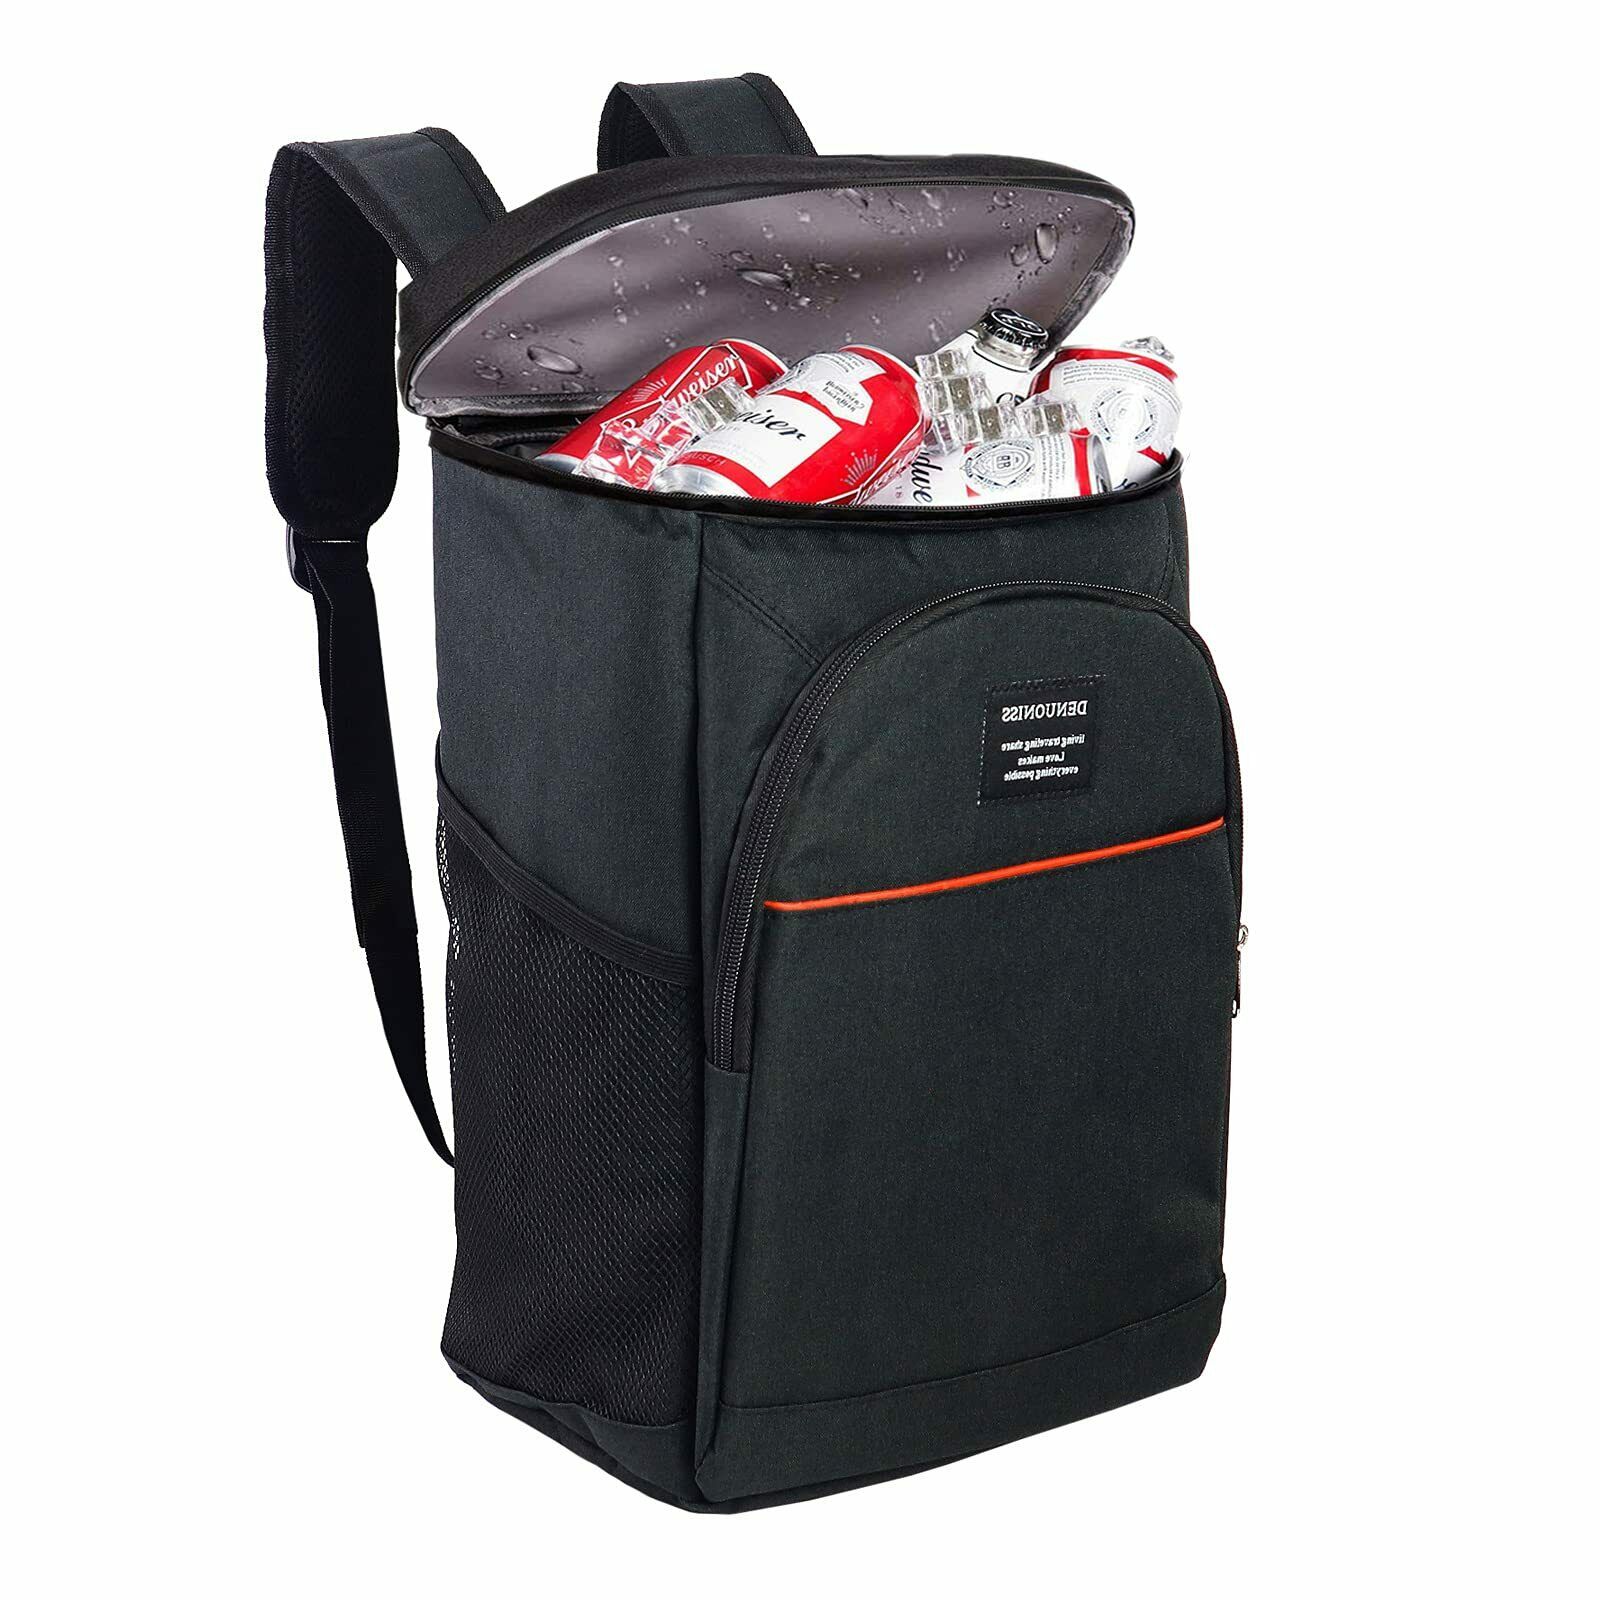 Free Shipping Overseas 25L Insulated Cooler Lunch Bag Backpack Leakproof Cooler Reusable Lunch Bag Waterproof Camping Cooler